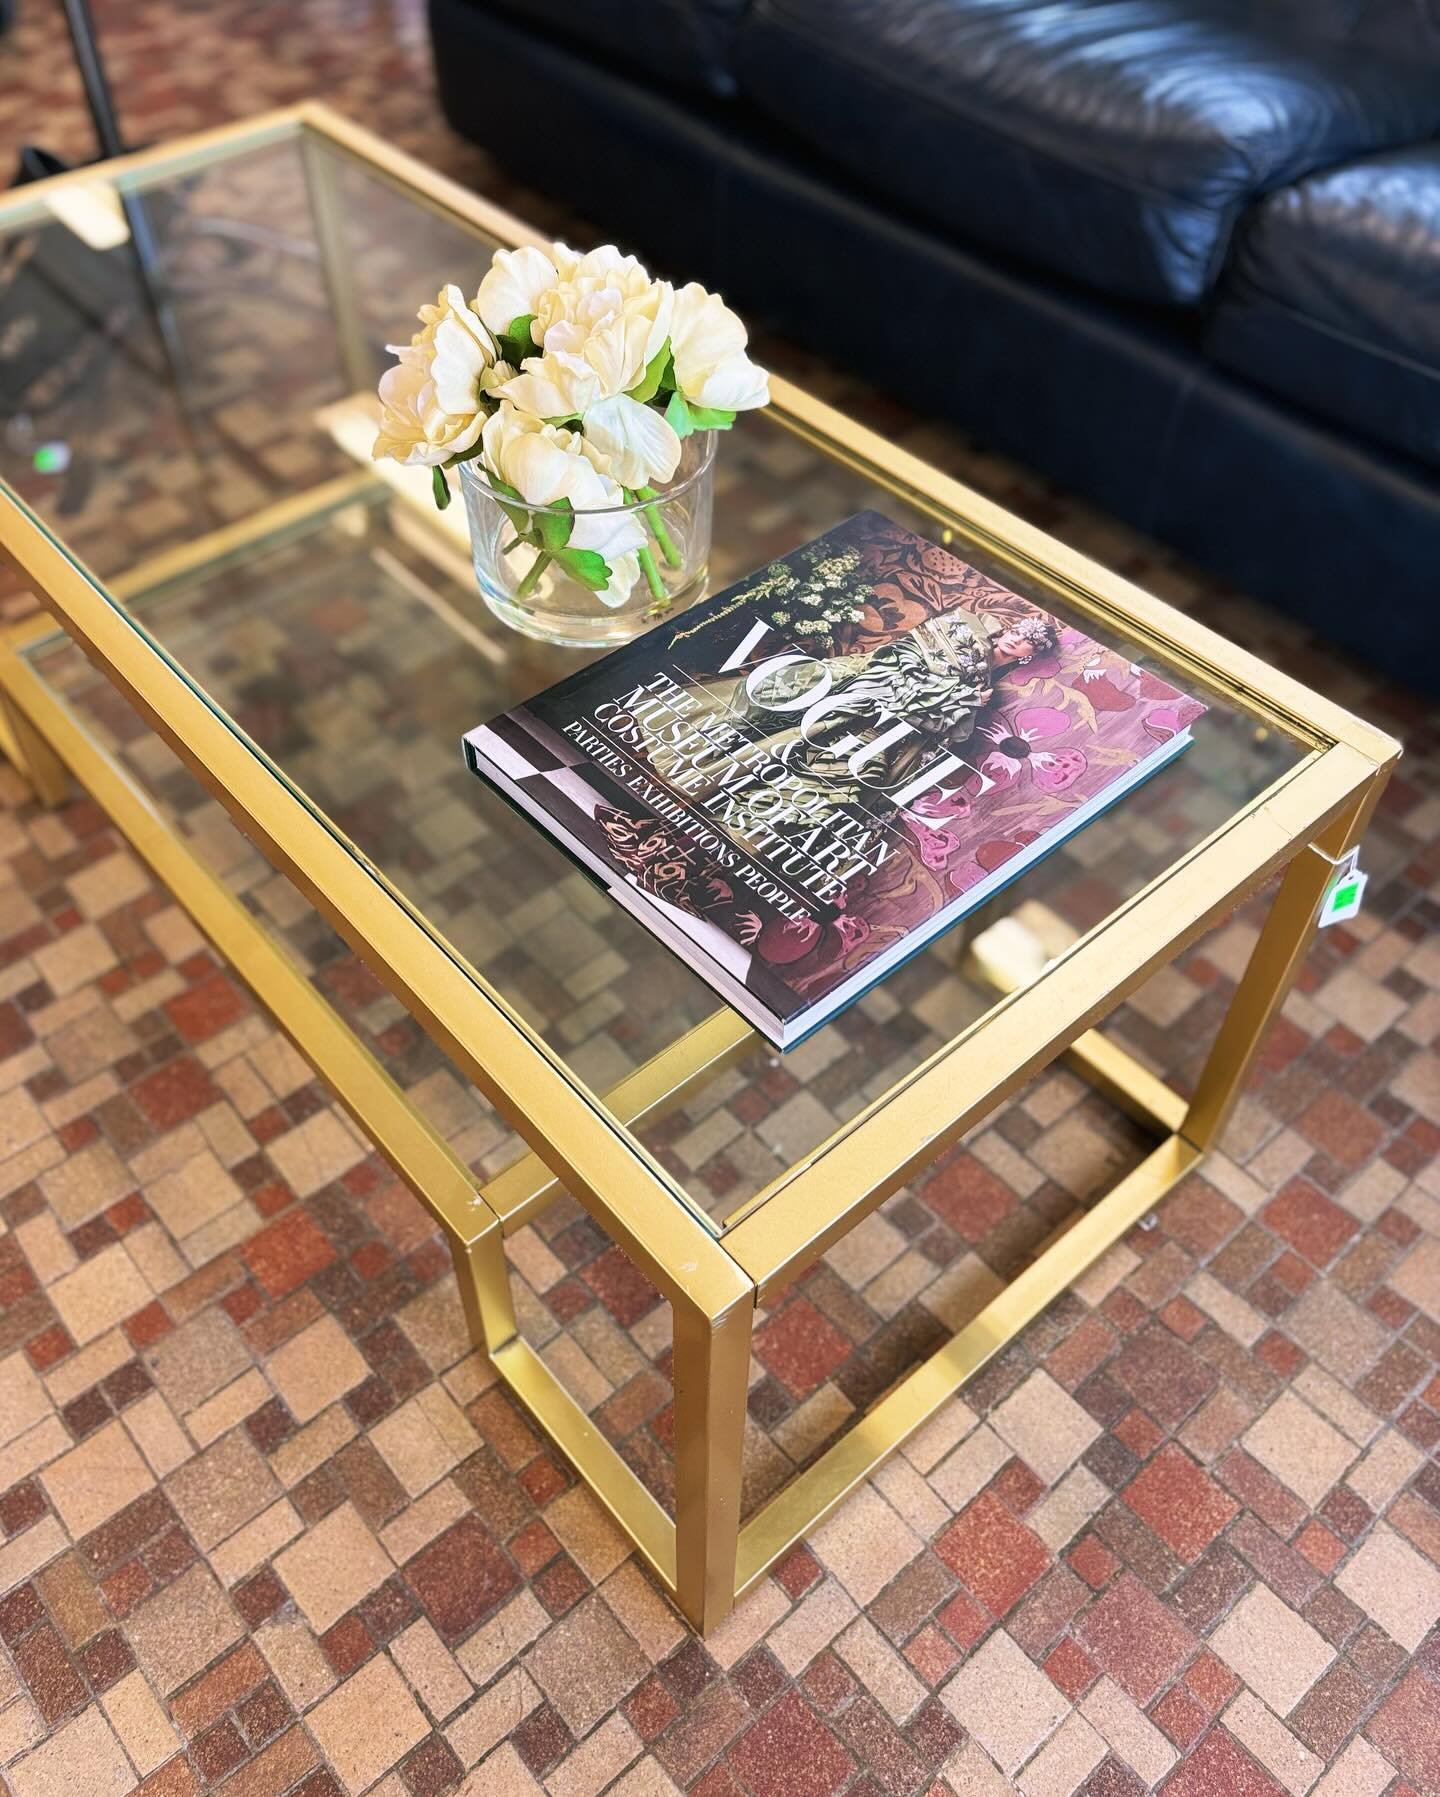 A sleek gold glass-top coffee table is just what you&rsquo;ve been looking for&hellip;..better grab a stylish coffee table book while you&rsquo;re at it 😜

#metcostumeinstitute #metcostume #coffetable #coffeetablebook #inspiredinteriors #homedecor #